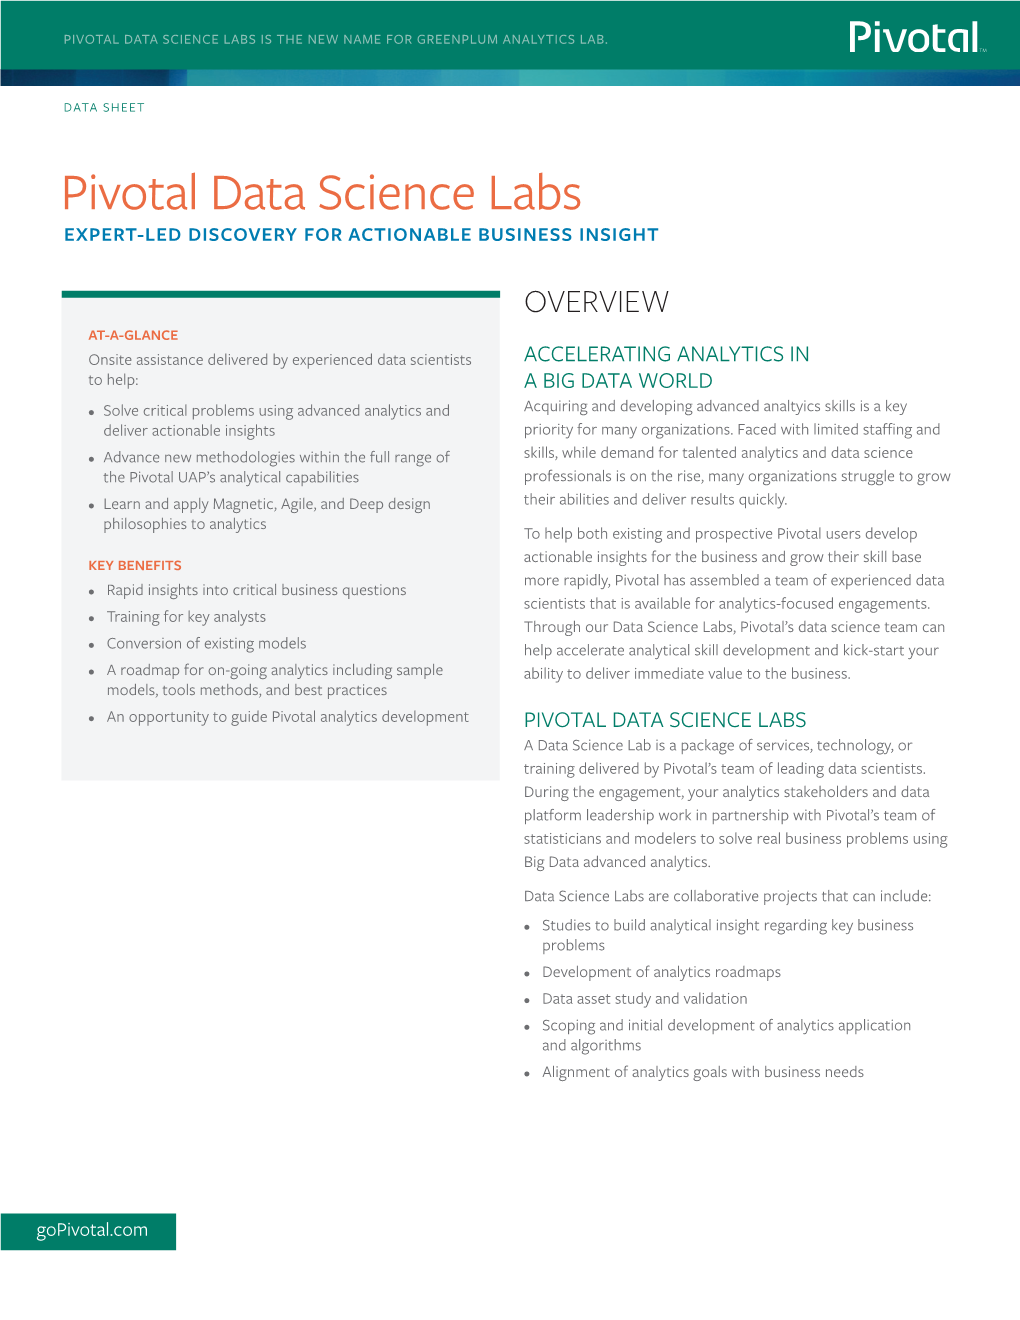 Pivotal Data Science Labs Is the New Name for Greenplum Analytics Lab